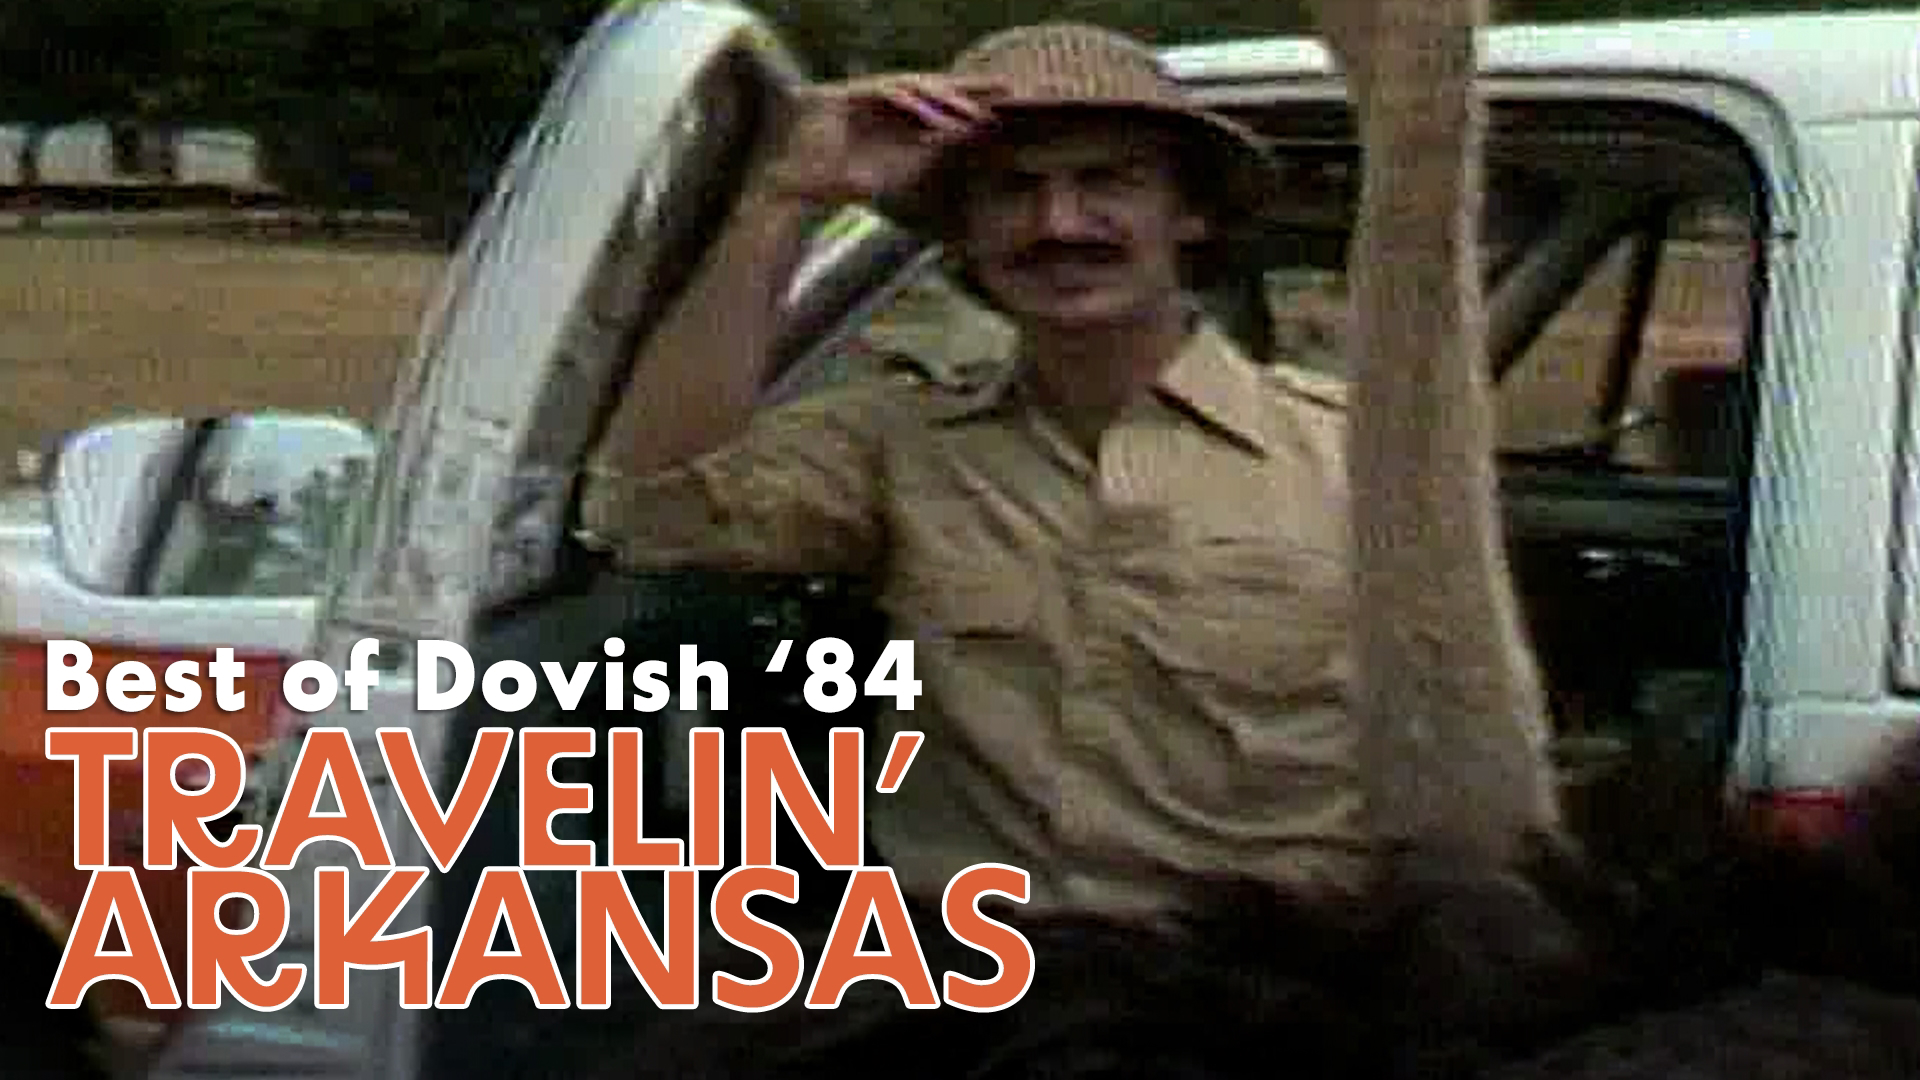 For 25 years, Chuck Dovish made Travelin' Arkansas for THV11. Enjoy this special from 1984, featuring rafting the Big Piney Creek, an old school farmer, and more!